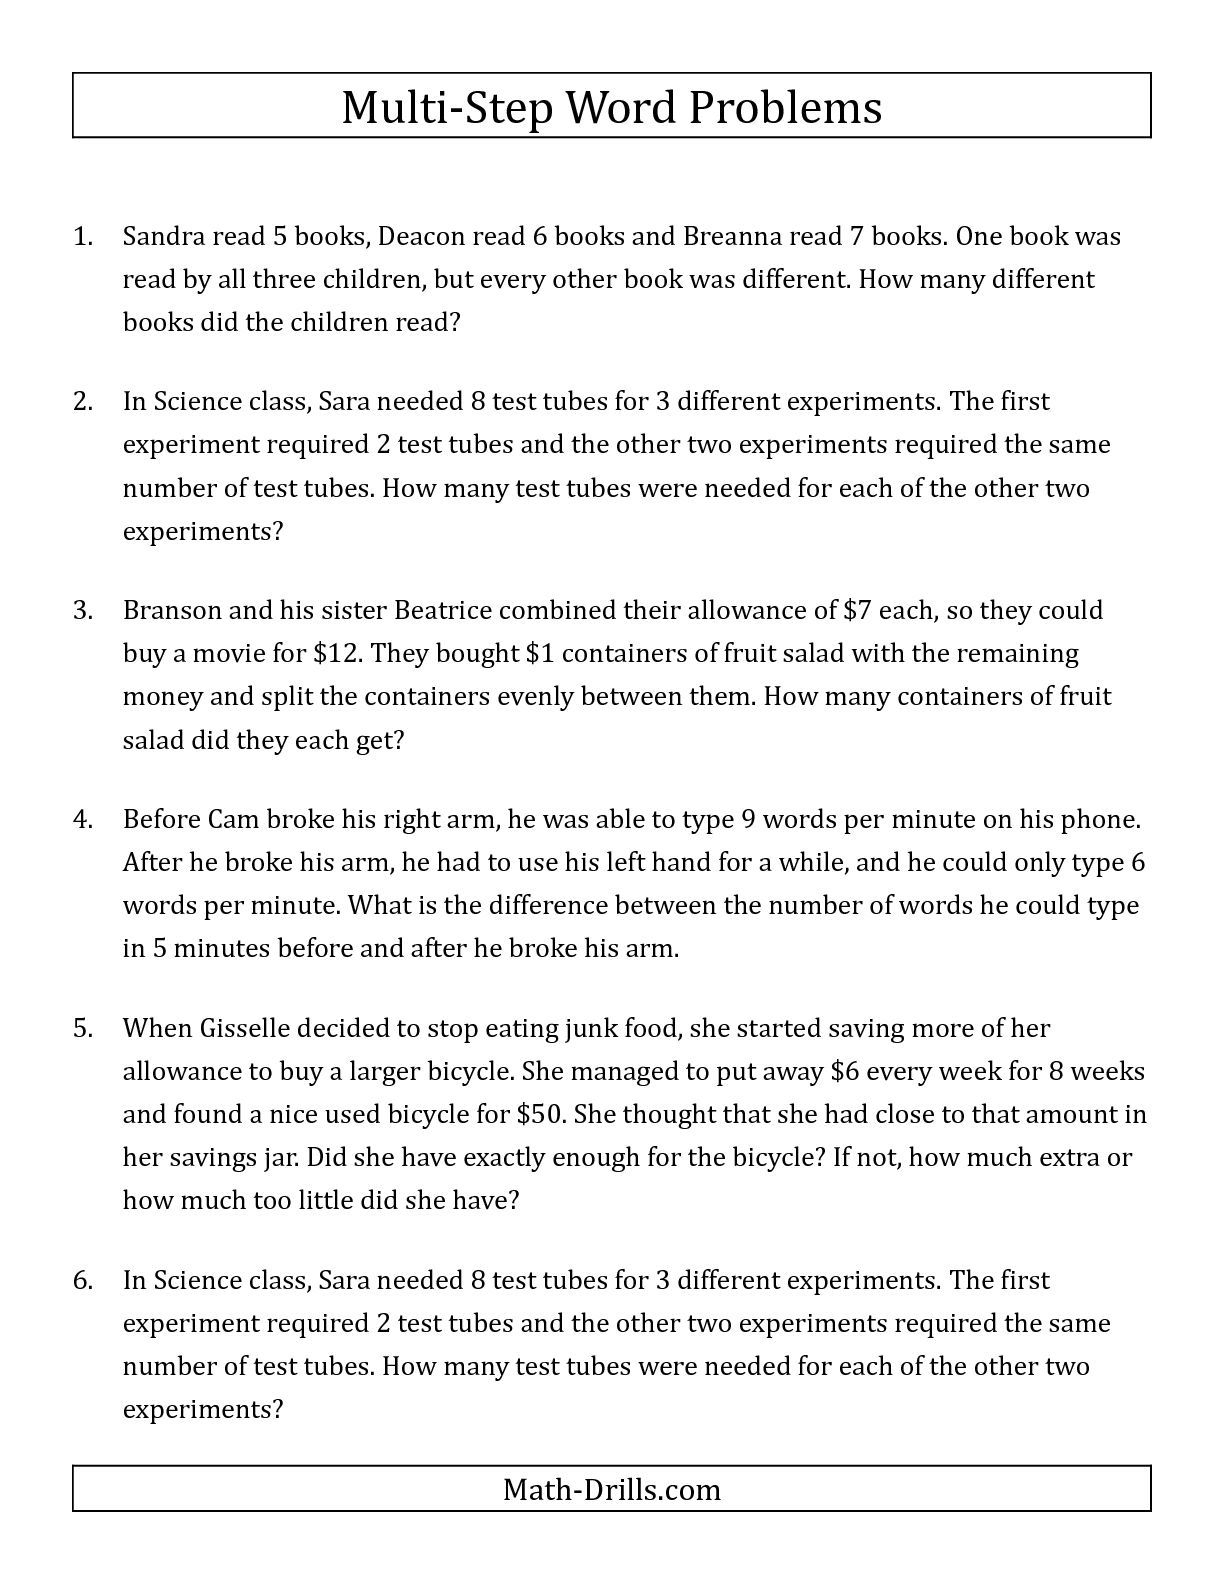 The Easy Multi-Step Word Problems Math Worksheet From The